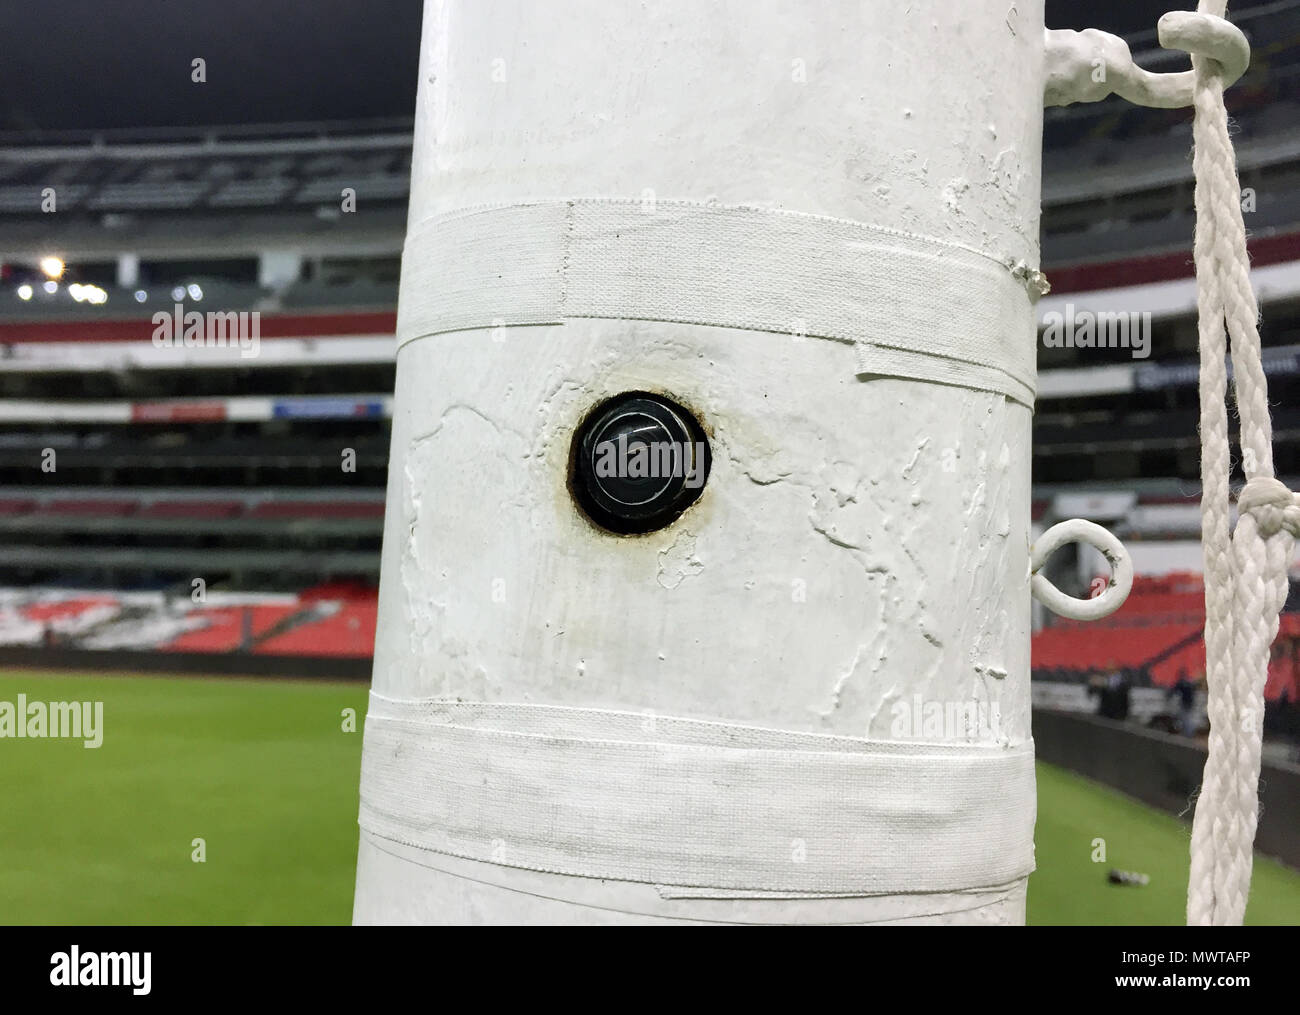 A view of the goal line technology at the Azteca Stadium in Mexico City ahead of the international friendly between Mexico and Scotland. PRESS ASSOCIATION Photo. Picture date: Saturday June 2, 2018. See PA story SOCCER Scotland. Photo credit should read: Ronnie Esplin/PA Wire Stock Photo